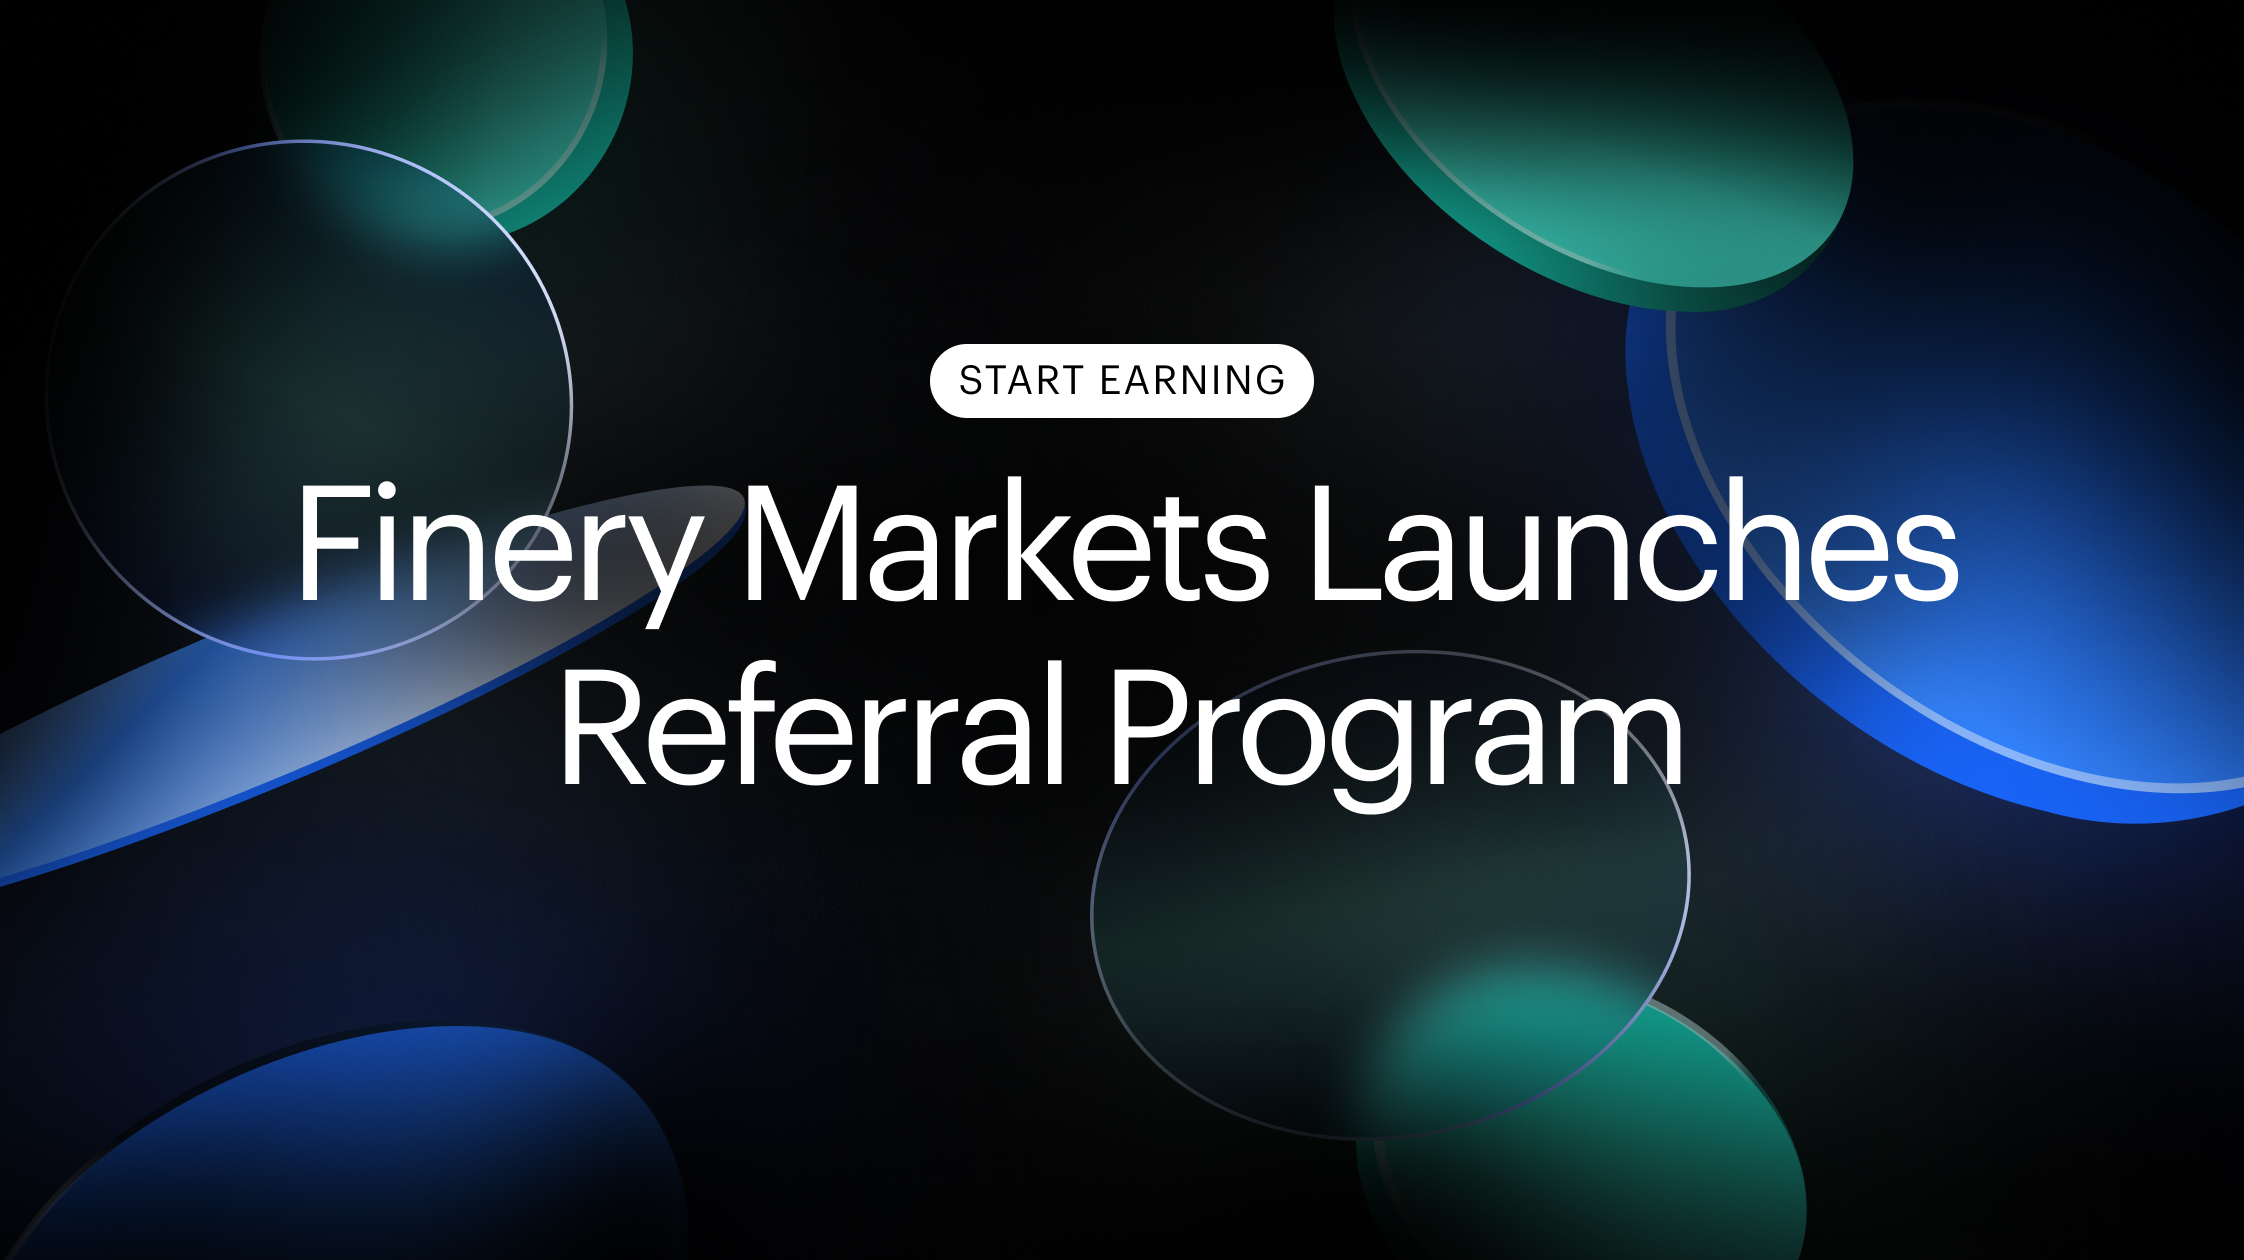 Finery Markets Launches Referral Program